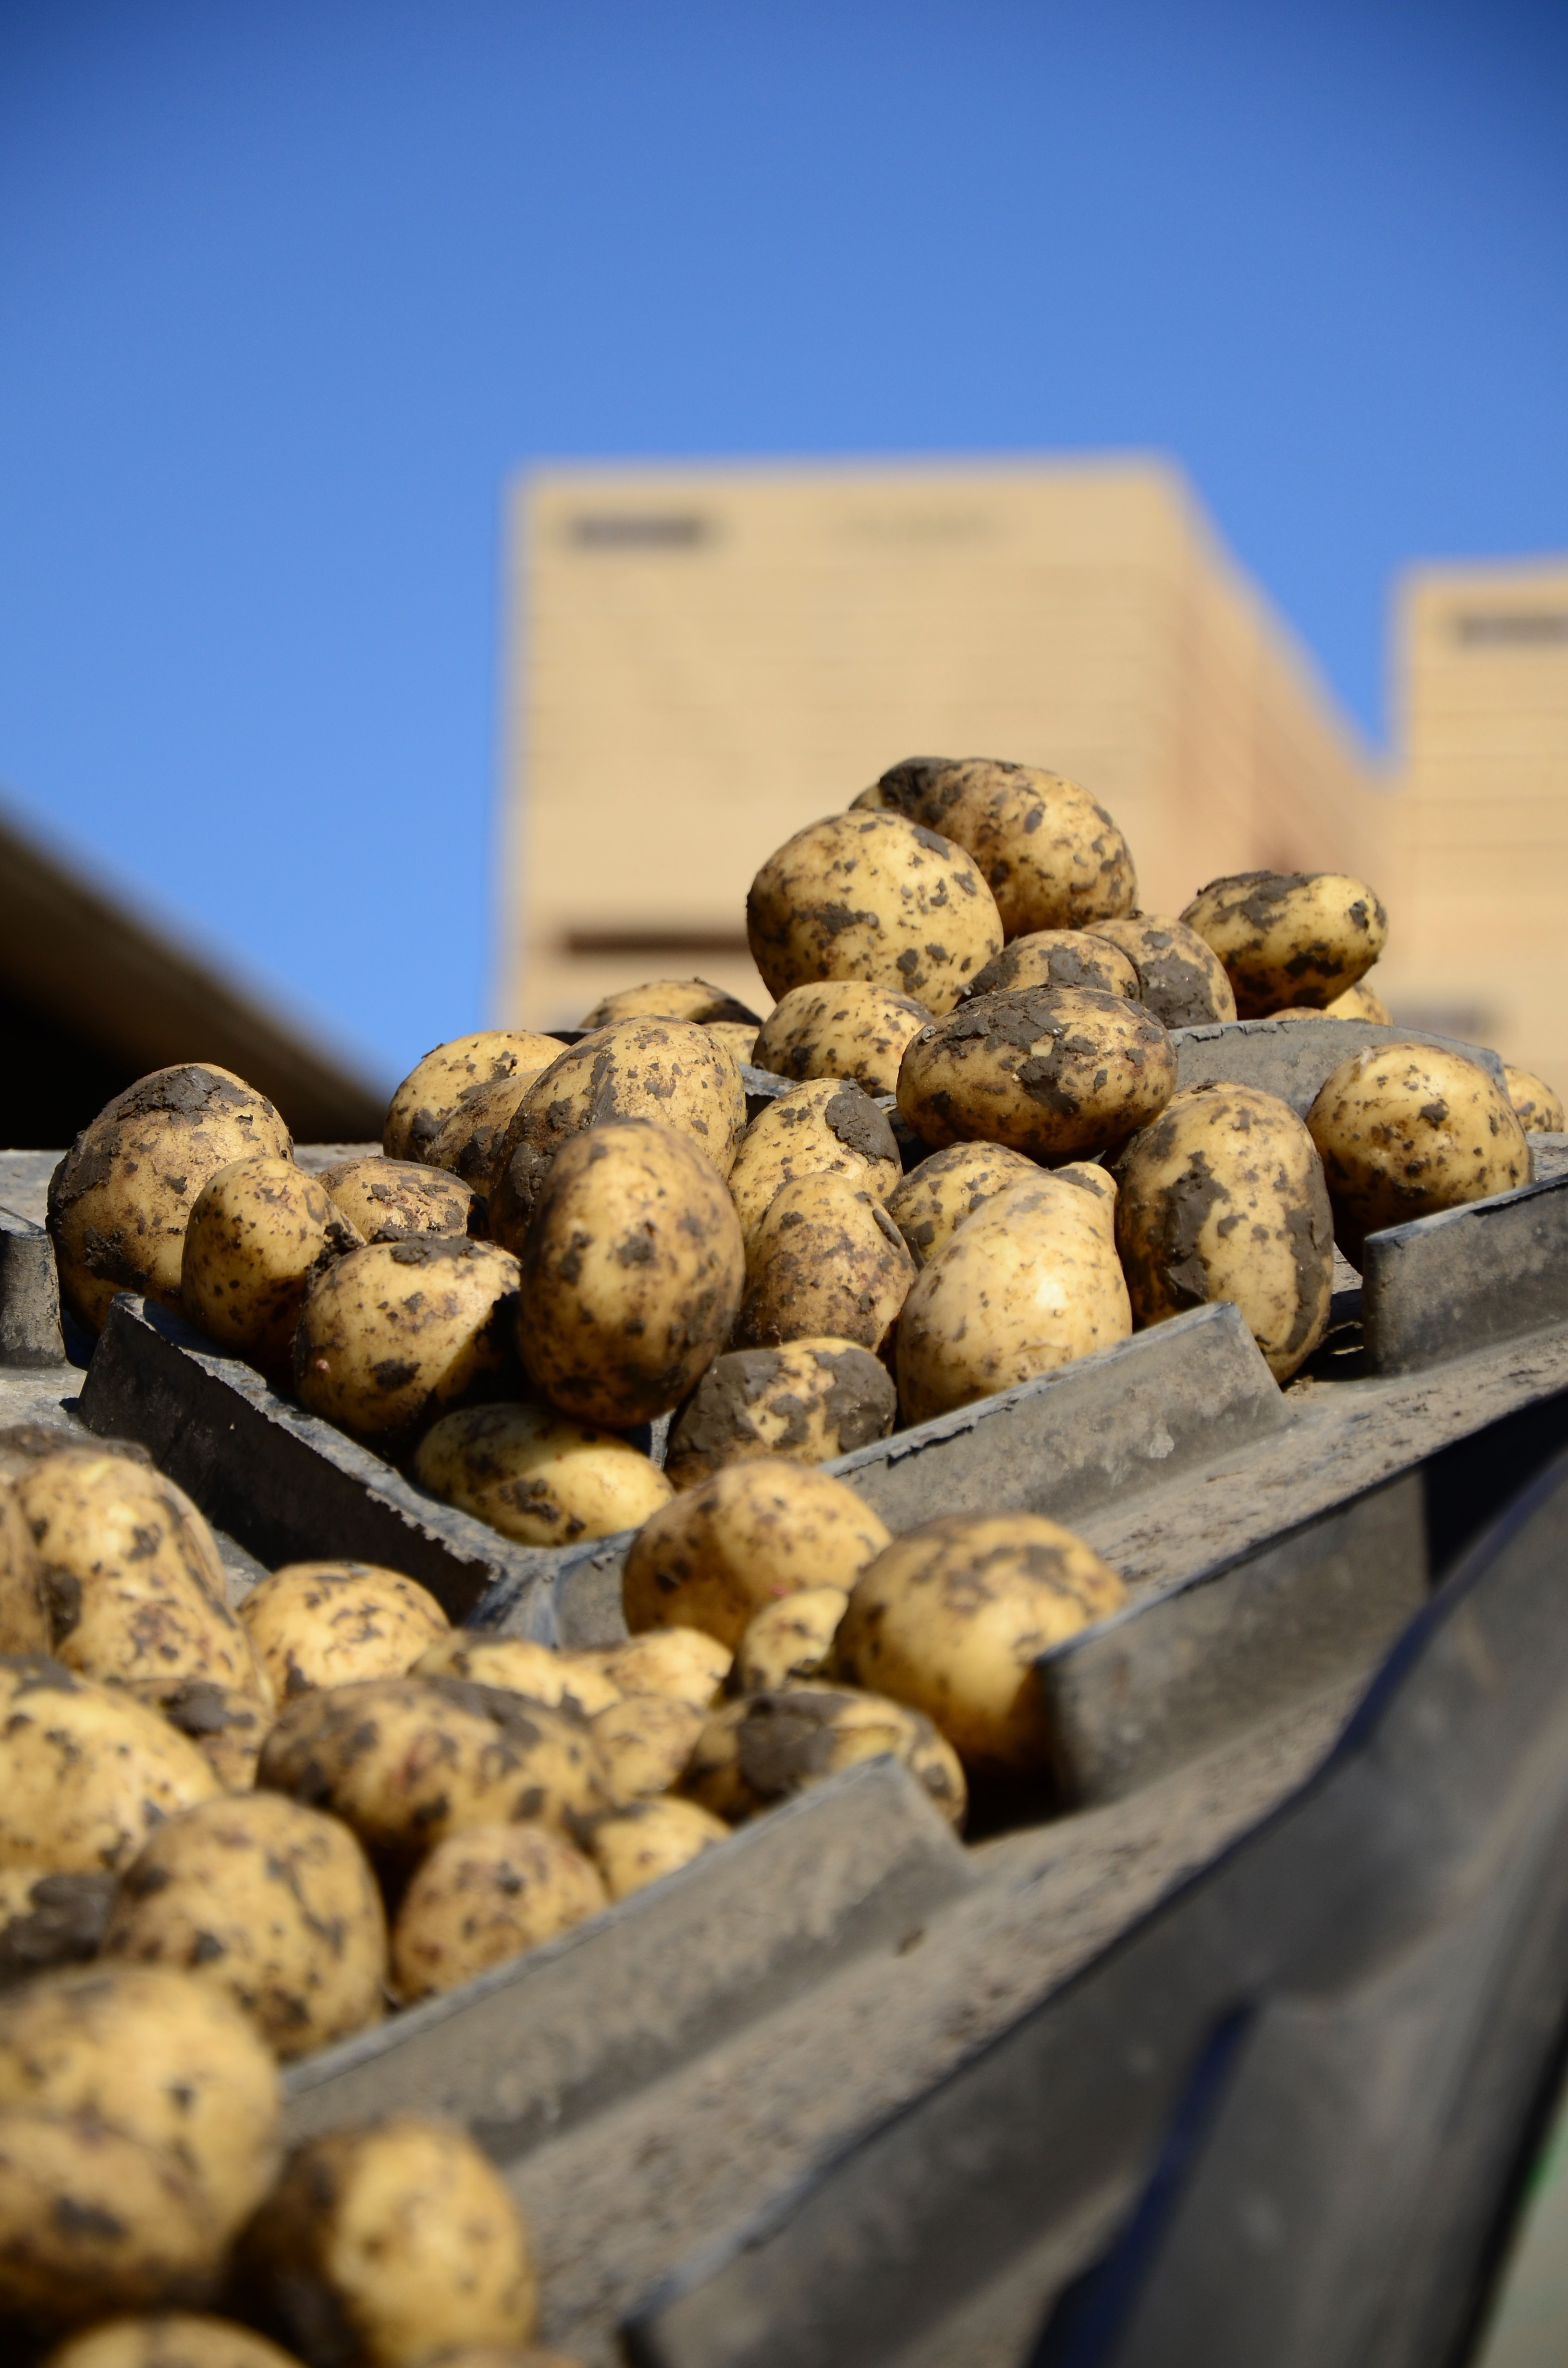 Seed potatoes on a conveyer